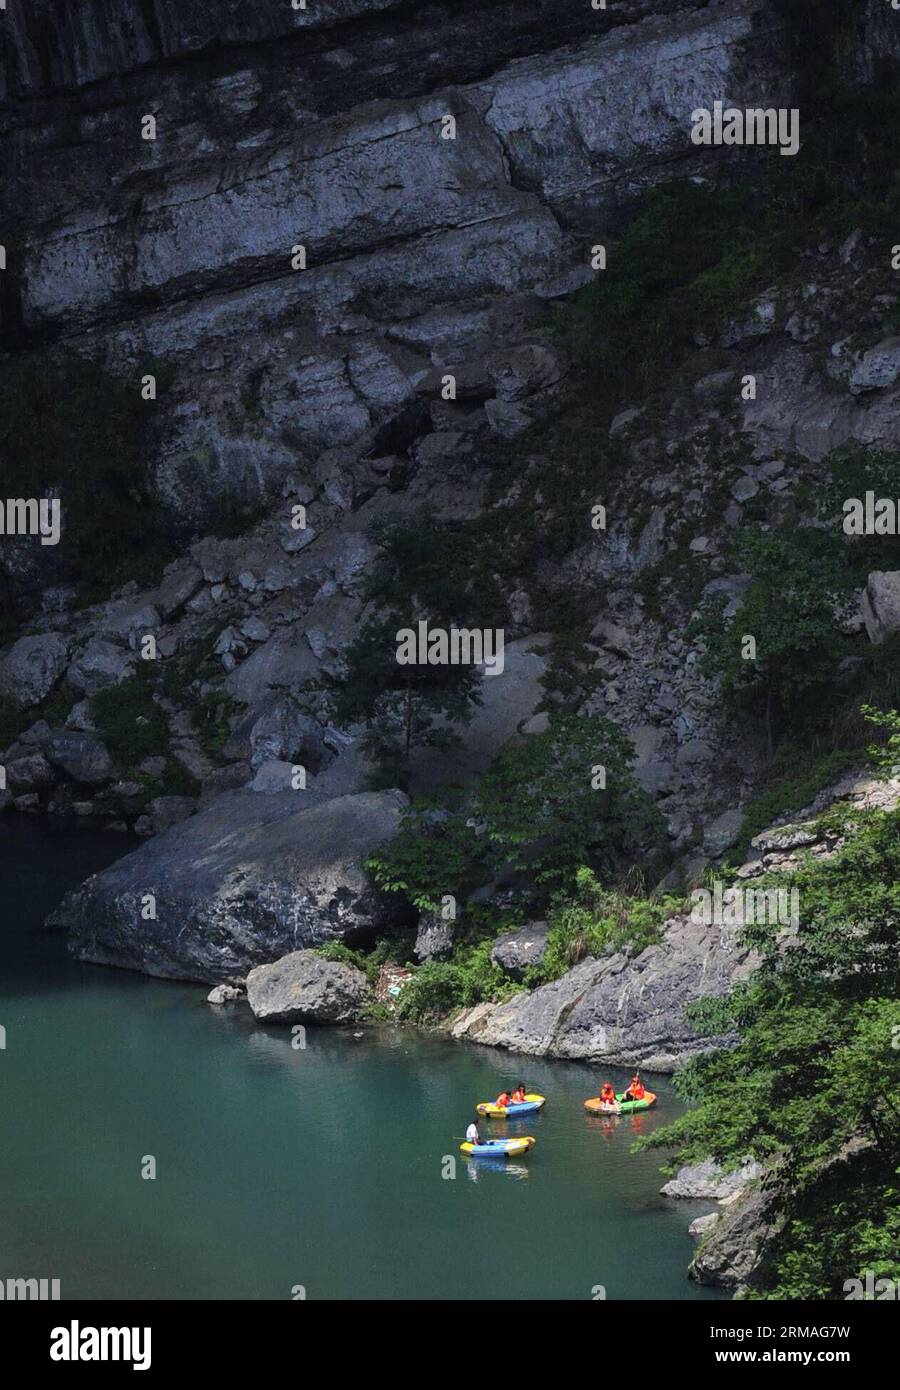 (140708) -- XIANFENG, July 8, 2014 (Xinhua) -- Tourists enjoy rafting within the Huangjindong Scenic Area in Xianfeng County, central China s Hubei Province, July 8, 2014. Many people sought refuge in whitewater rafting against the summer heat. (Xinhua/Yang Shunpi) (lmm) CHINA-SUMMER-LEISURE-RAFTING (CN) PUBLICATIONxNOTxINxCHN   Xian Feng July 8 2014 XINHUA tourists Enjoy Rafting Within The  Scenic Area in Xian Feng County Central China S Hubei Province July 8 2014 MANY Celebrities sought Refuge in Whitewater Rafting against The Summer Heat XINHUA Yang Shunpi lmm China Summer Leisure Rafting C Stock Photo